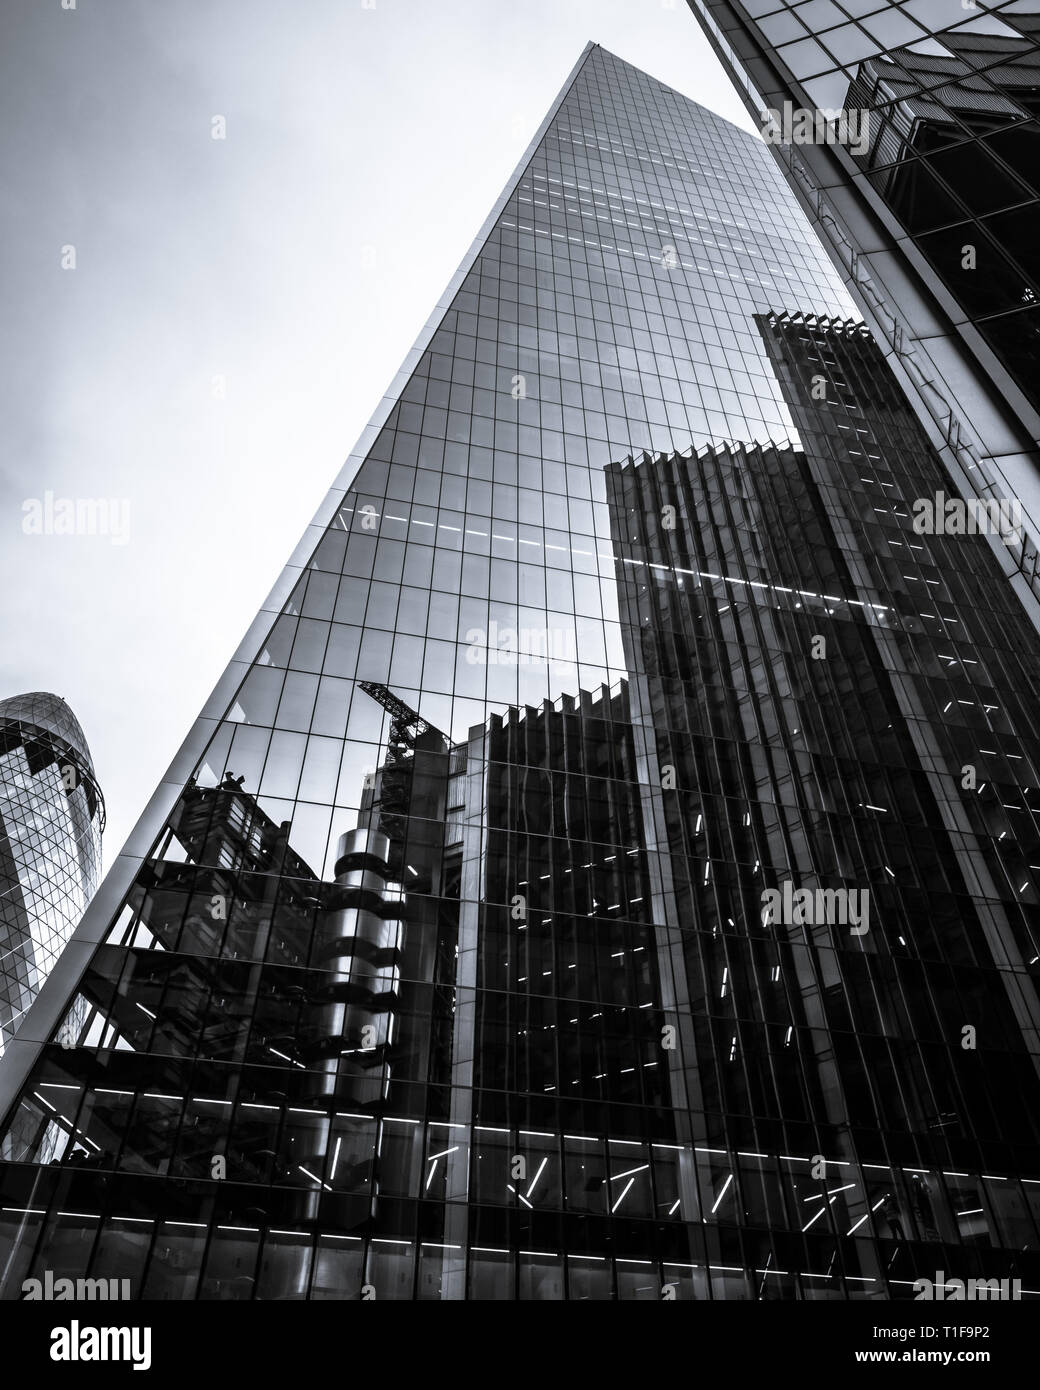 London, United Kingdom: metal and glass skyscrapers in the City of London. Black and White photograph. Stock Photo